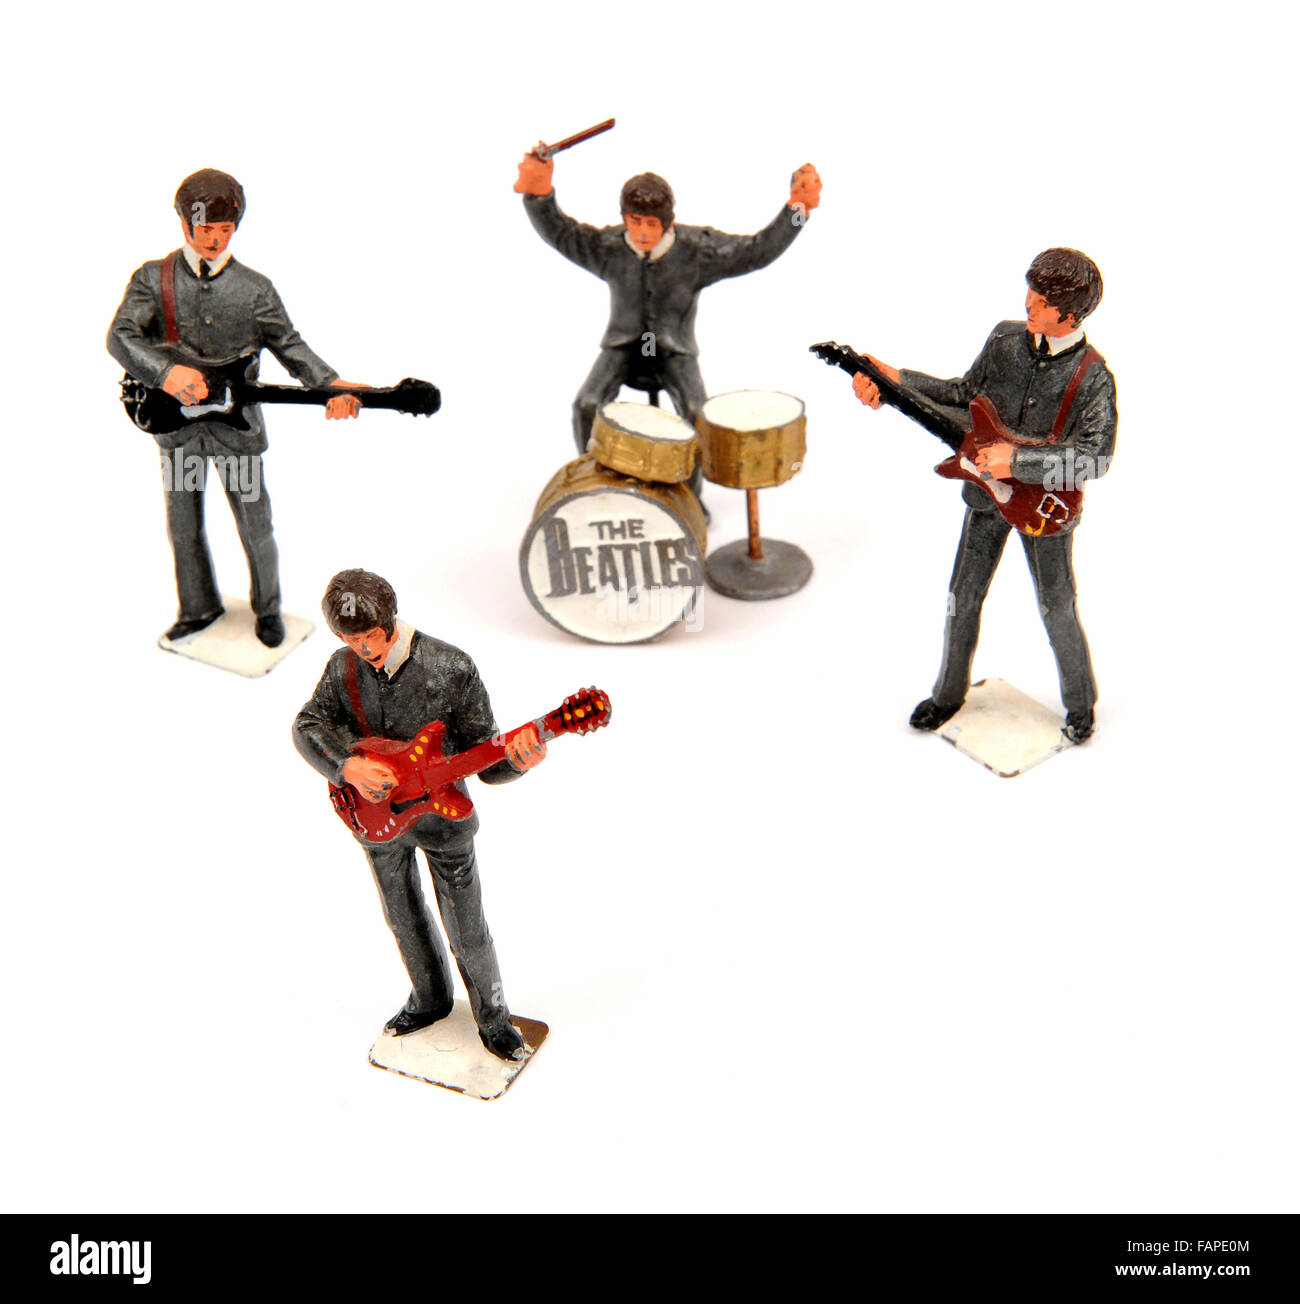 Children's die cast metal figures of The Beatles playing instruments Stock Photo